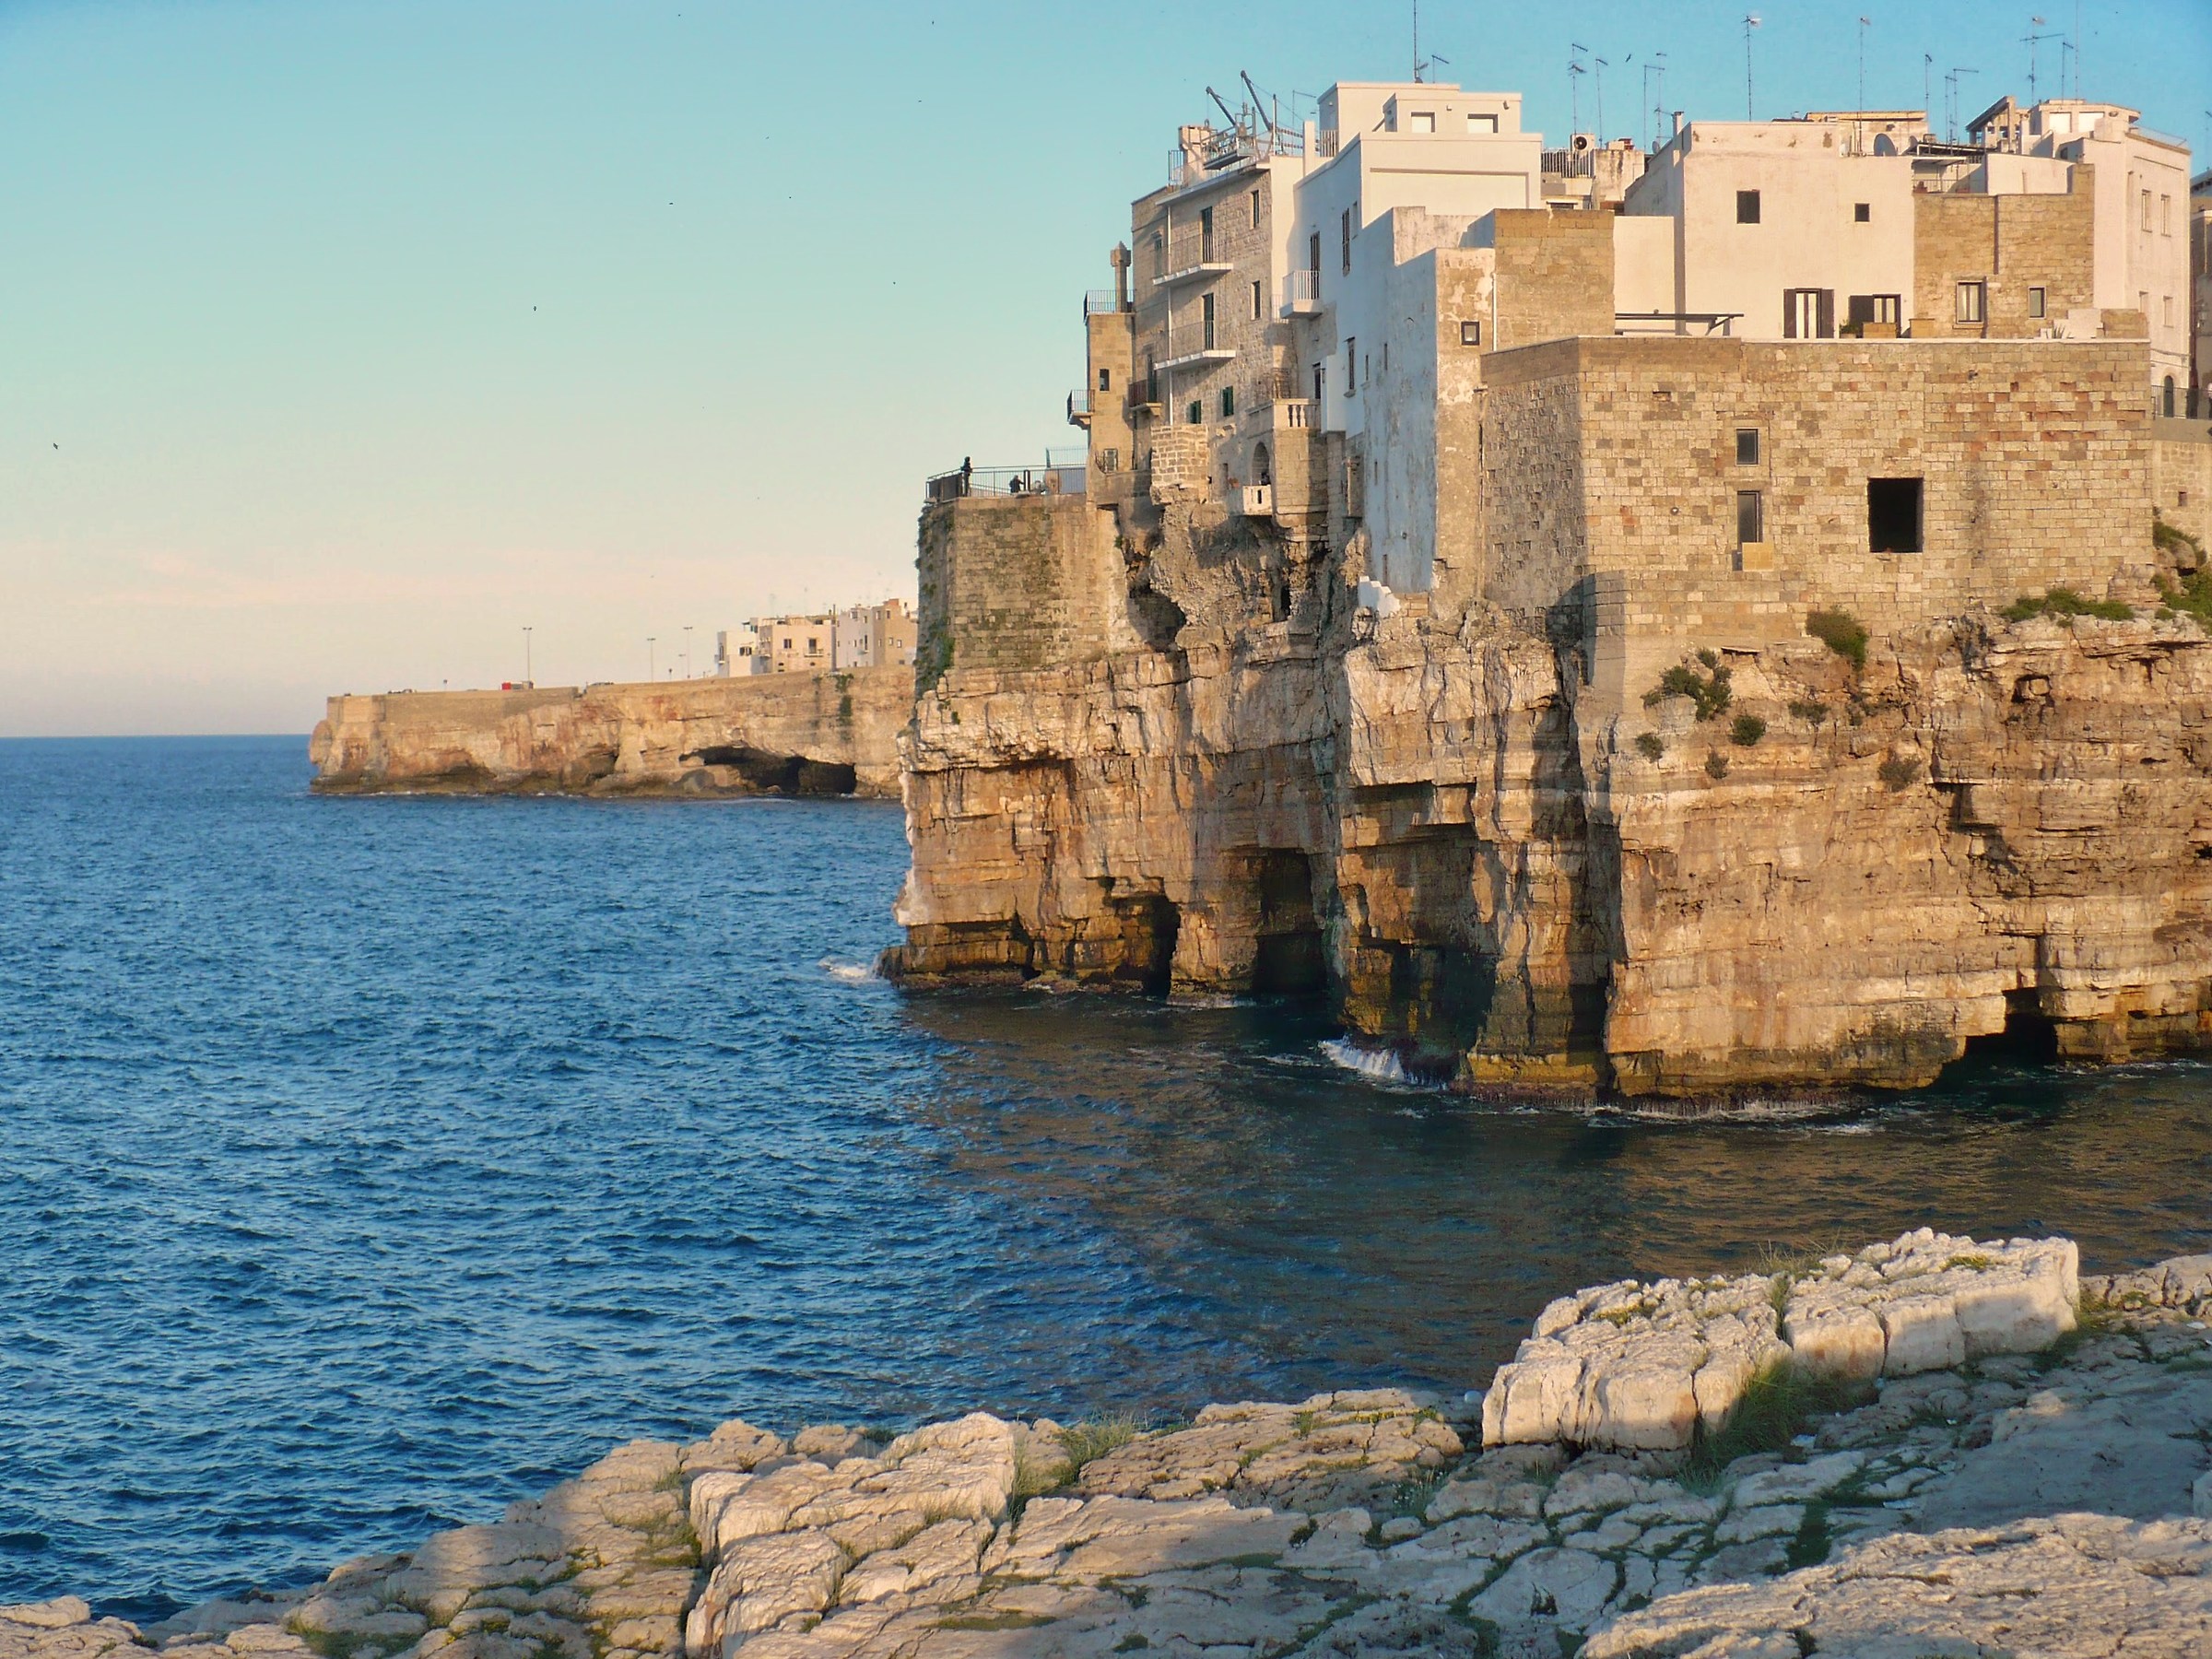 Other perspective of Polignano...